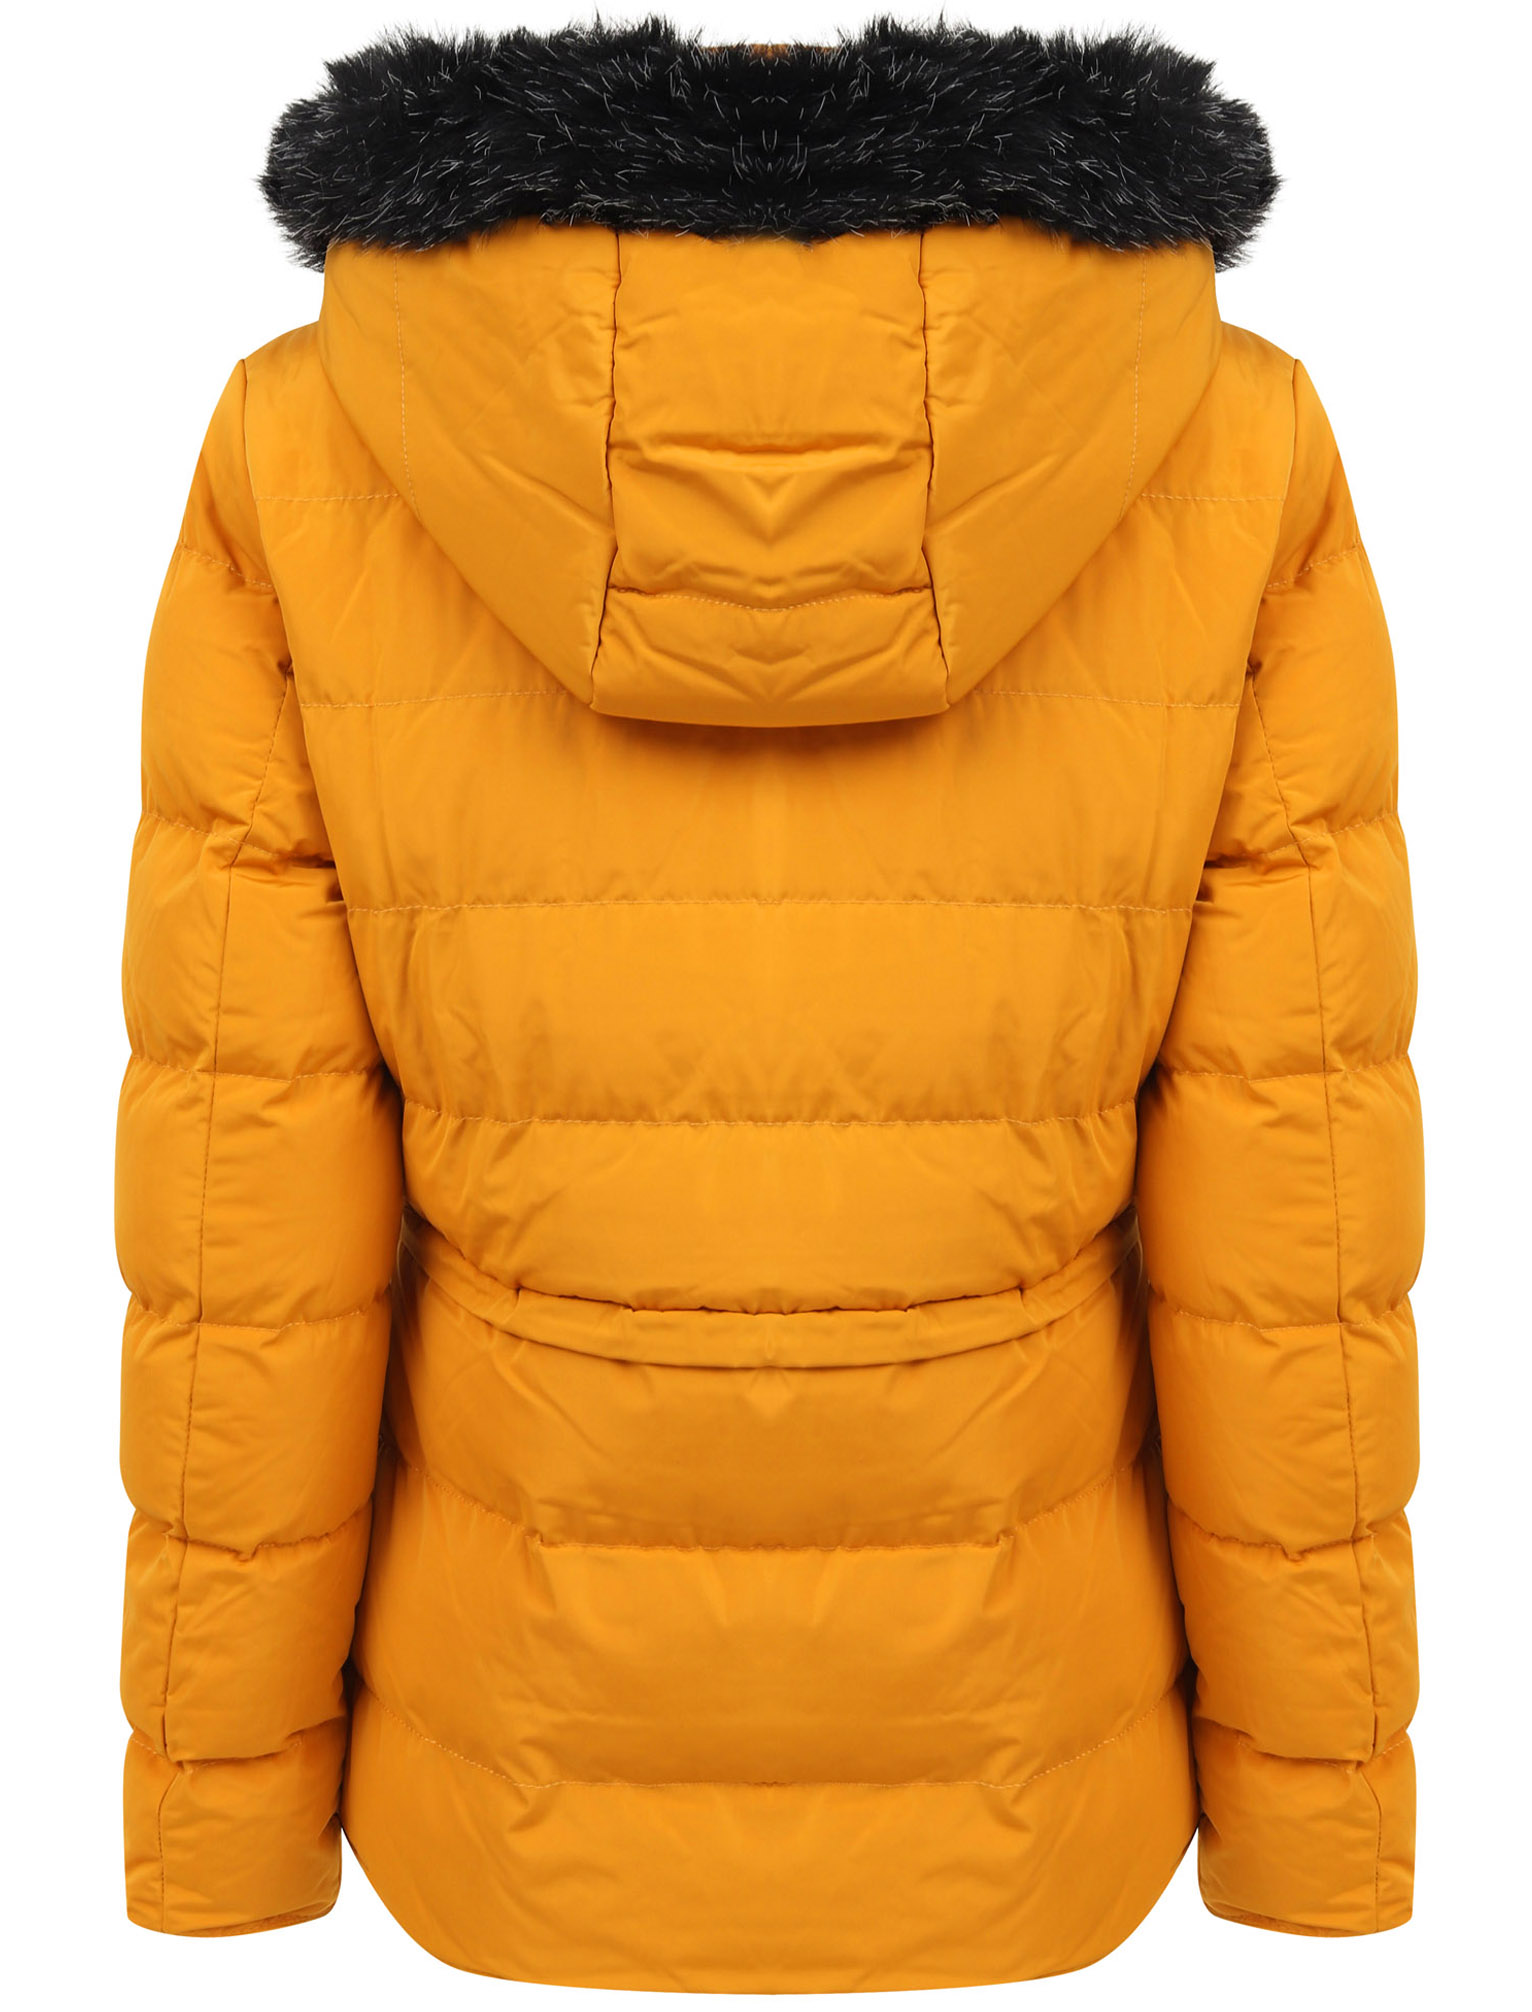 Tokyo Laundry Womens Jasmin Quilted Hooded Jacket Padded Puffer Coat ...